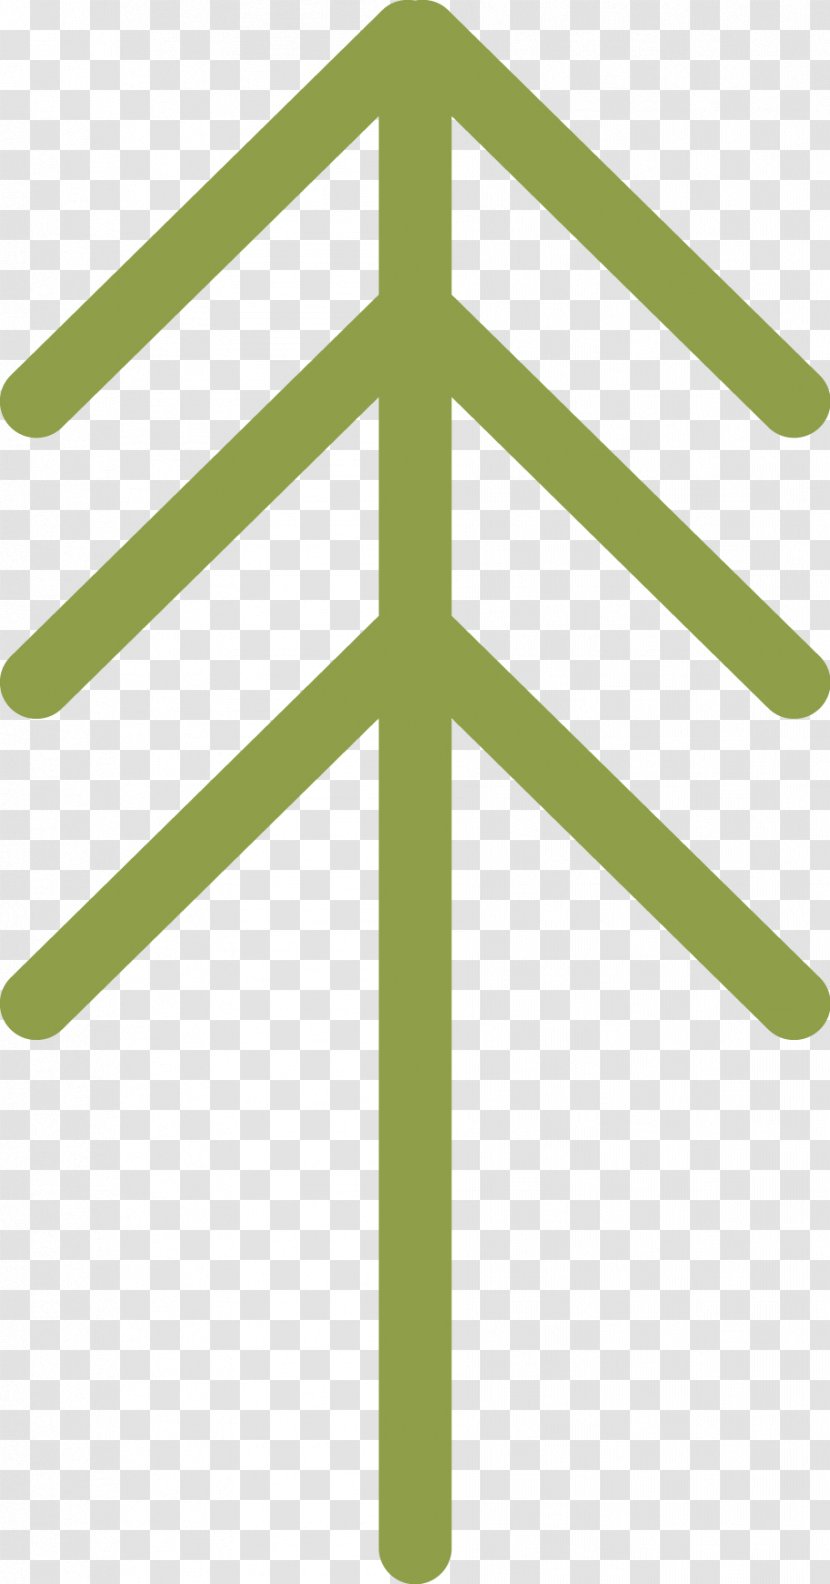 Consultant Marketing Architecture Professional - Little Tree Transparent PNG